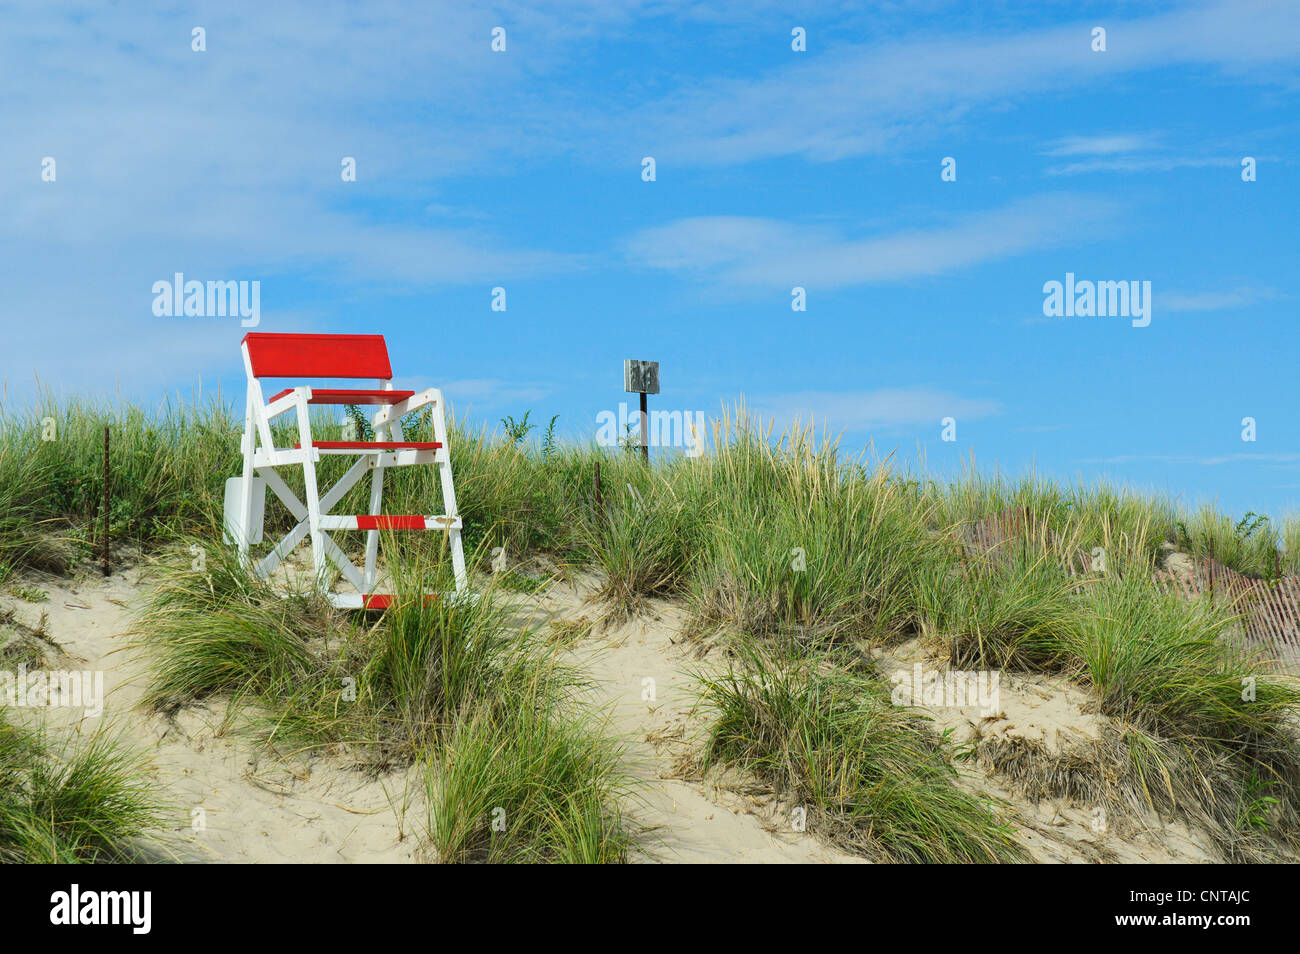 Empty red and white lifeguard chair on sand dune, Misquamicut State Beach, Westerly, Rhode Island USA Stock Photo